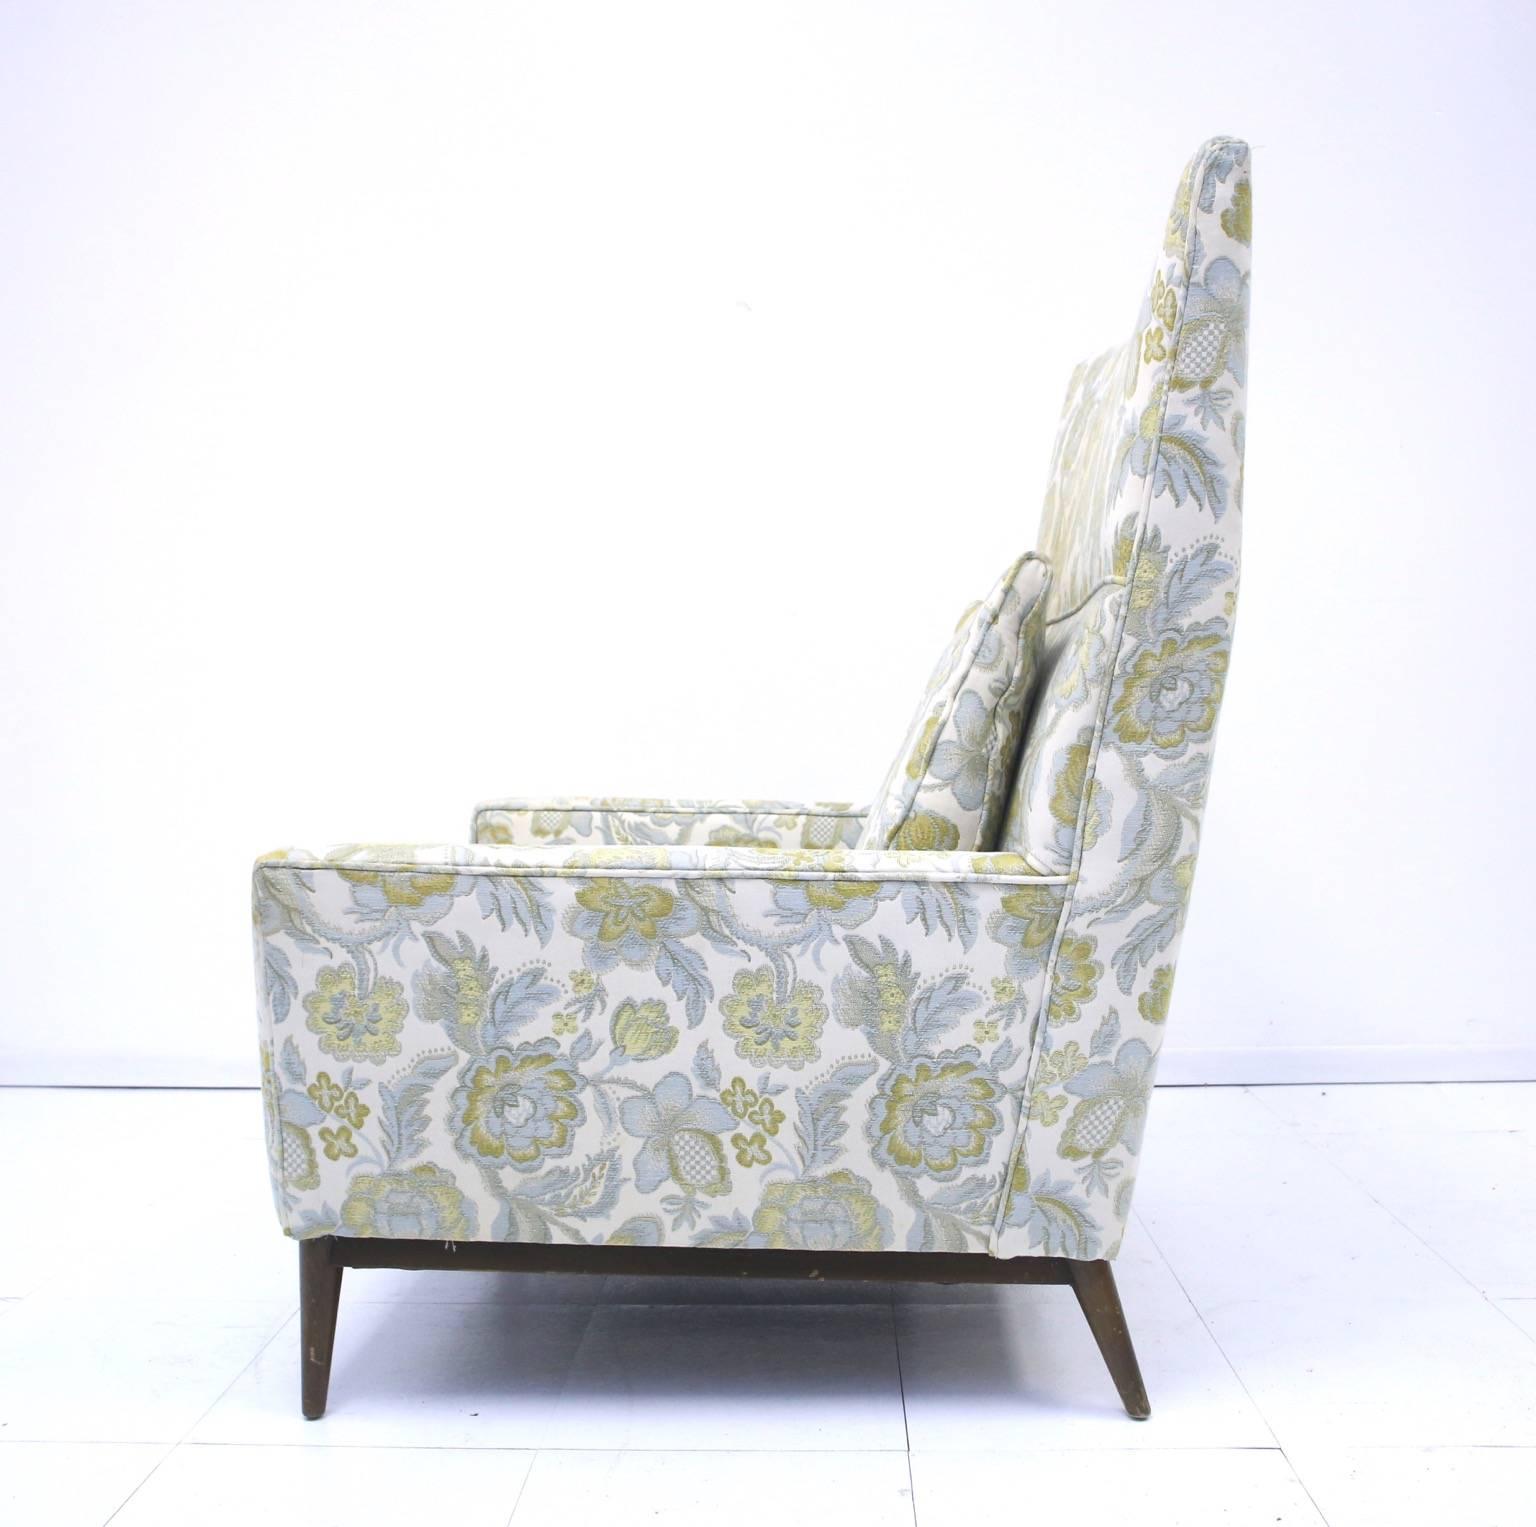 Designer: Paul McCobb.
Manufacturer: Directional.
Period/Style: Mid-Century Modern.
Country: United States. 
Date: 1960s.